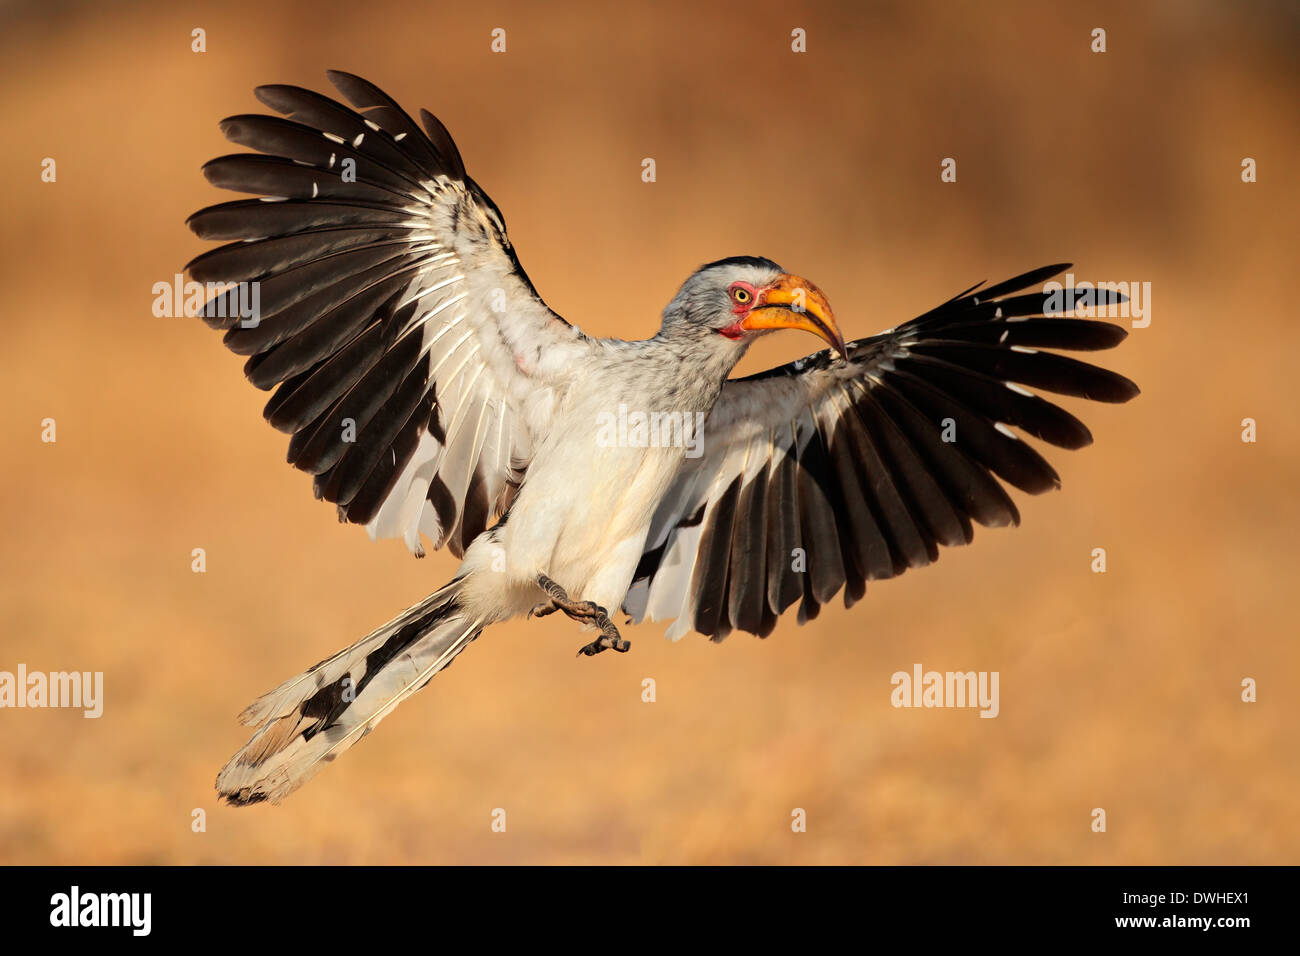 Yellow-billed hornbill (Tockus flavirostris) landing with open wings, South Africa Stock Photo